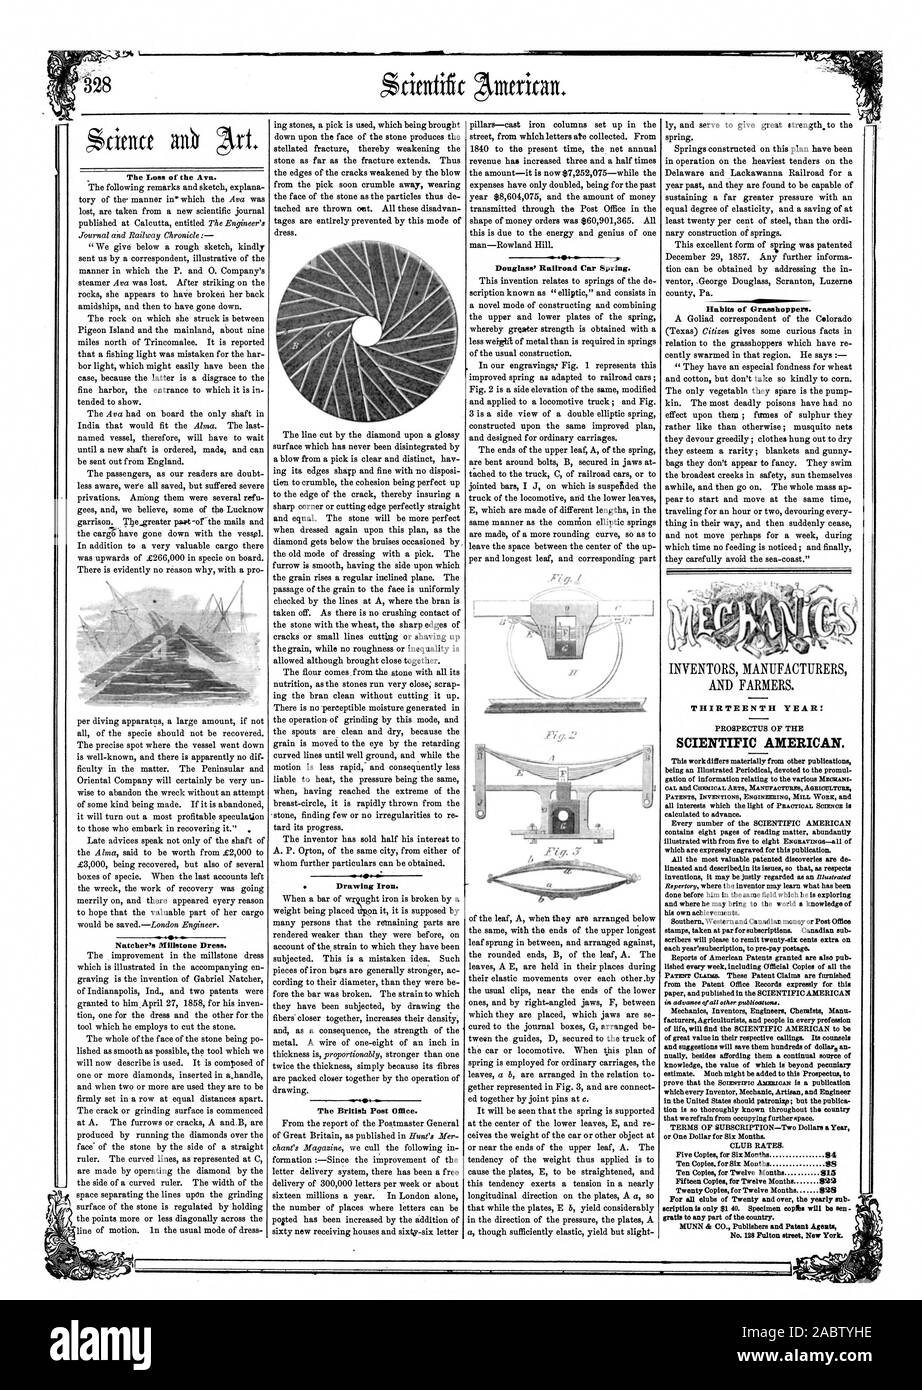 The Loss of the Ava. Natcher's Millstone Dress. Drawing Iron. The British  Post Office. Douglass' Railroad Car Spring. Habits of Grasshoppers.  THIRTEENTH YEAR SCIENTIFIC AMERICAN. PATENTS INVENTIONS ENGINEERING MILL  WORK and knowledge